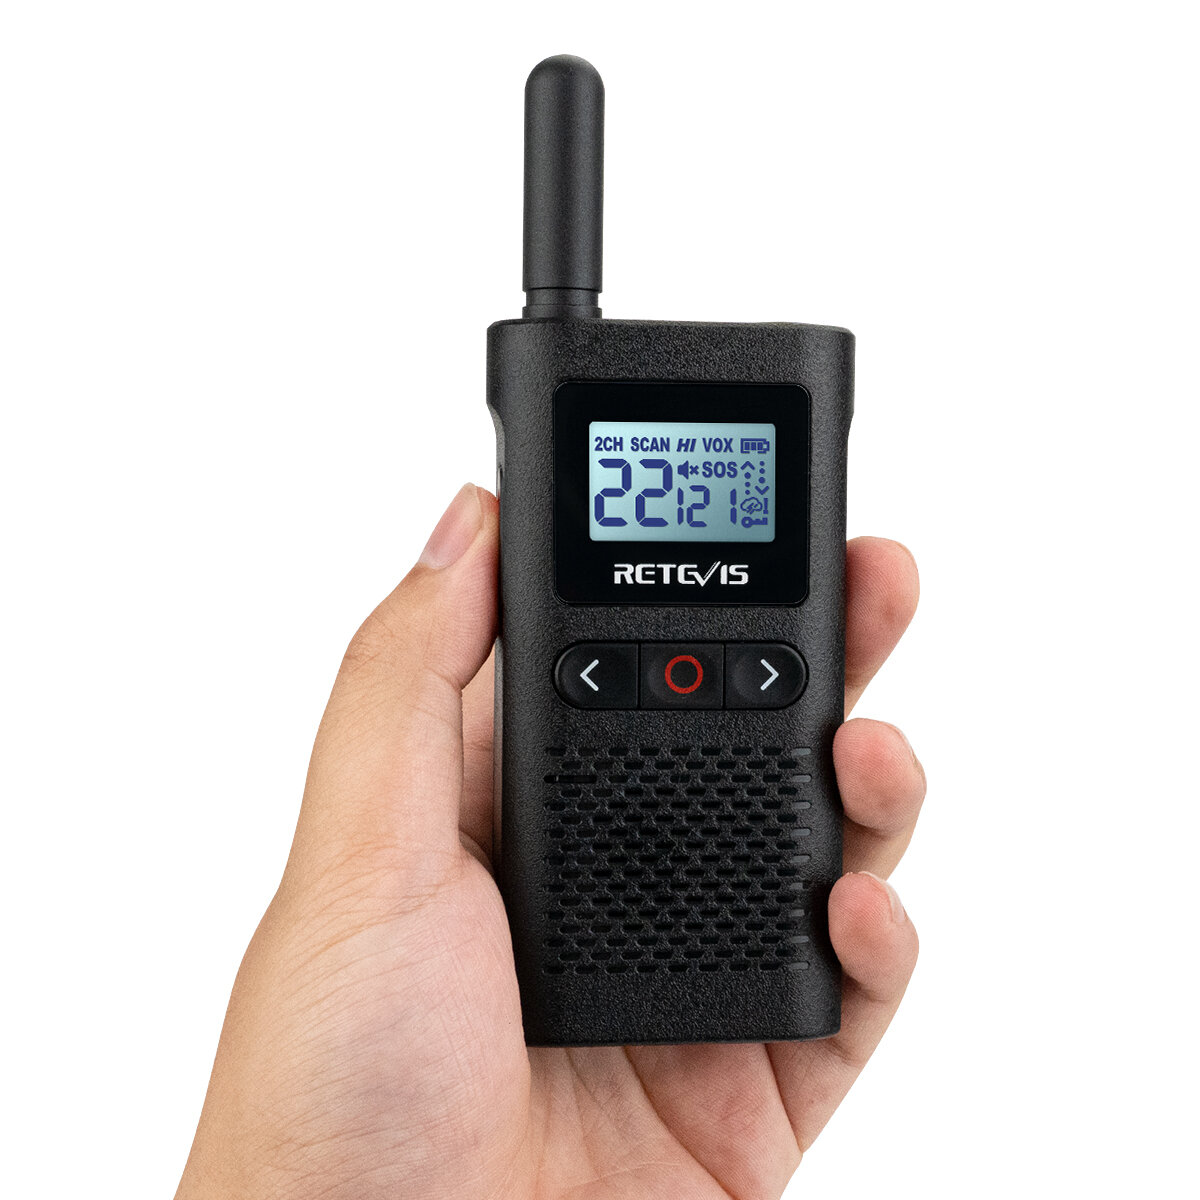 

2pcs Retevis RB28 RB628 Walkie Talkie 22CH FRS Weather Forecast Weather Alarm 16CH PMR License free Handheld Two Way Rad